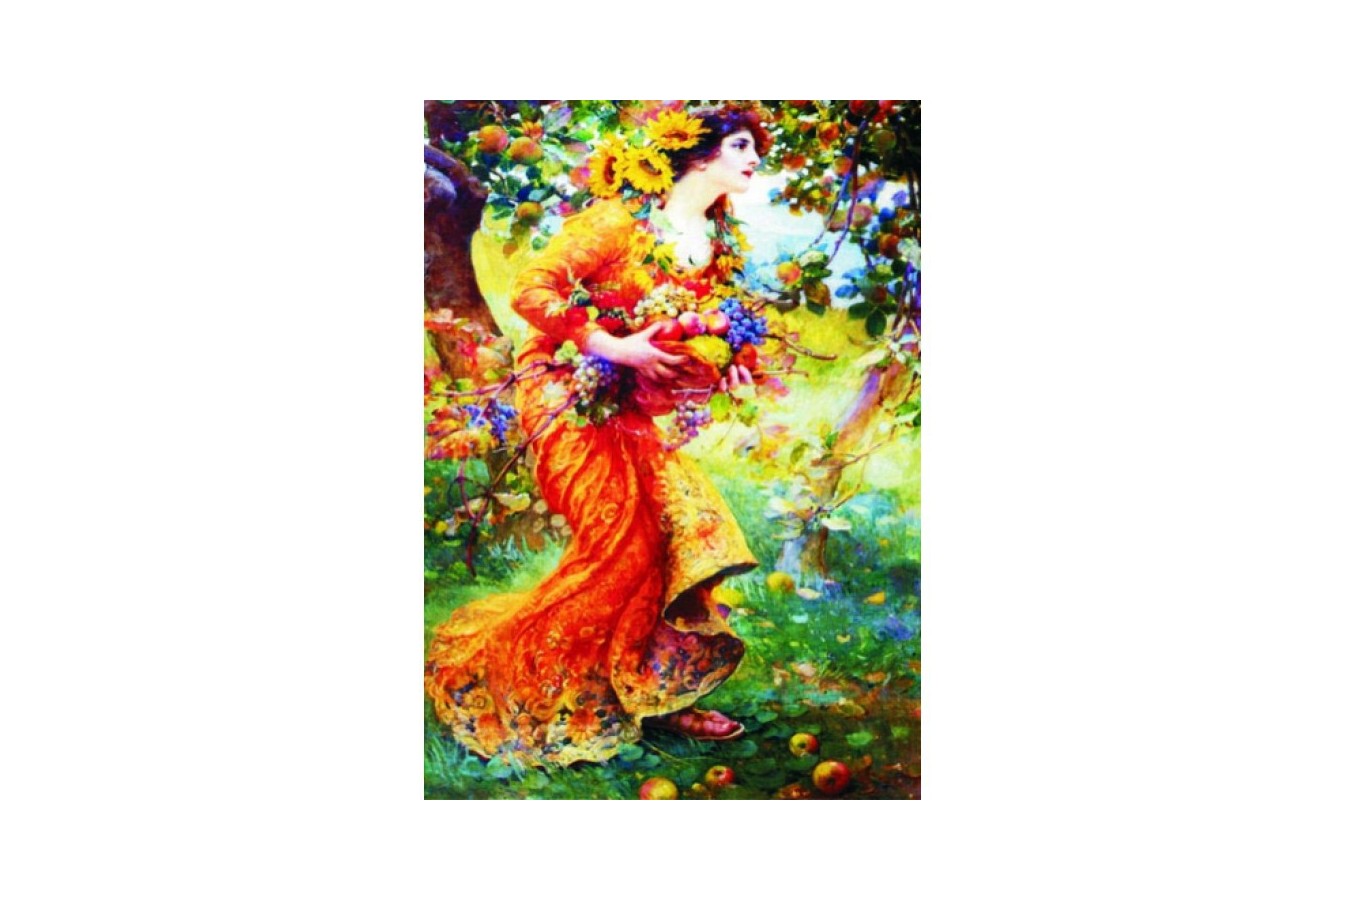 Puzzle Gold Puzzle - Franz Dvorak: In the Orchard, 1.000 piese (Gold-Puzzle-60591)